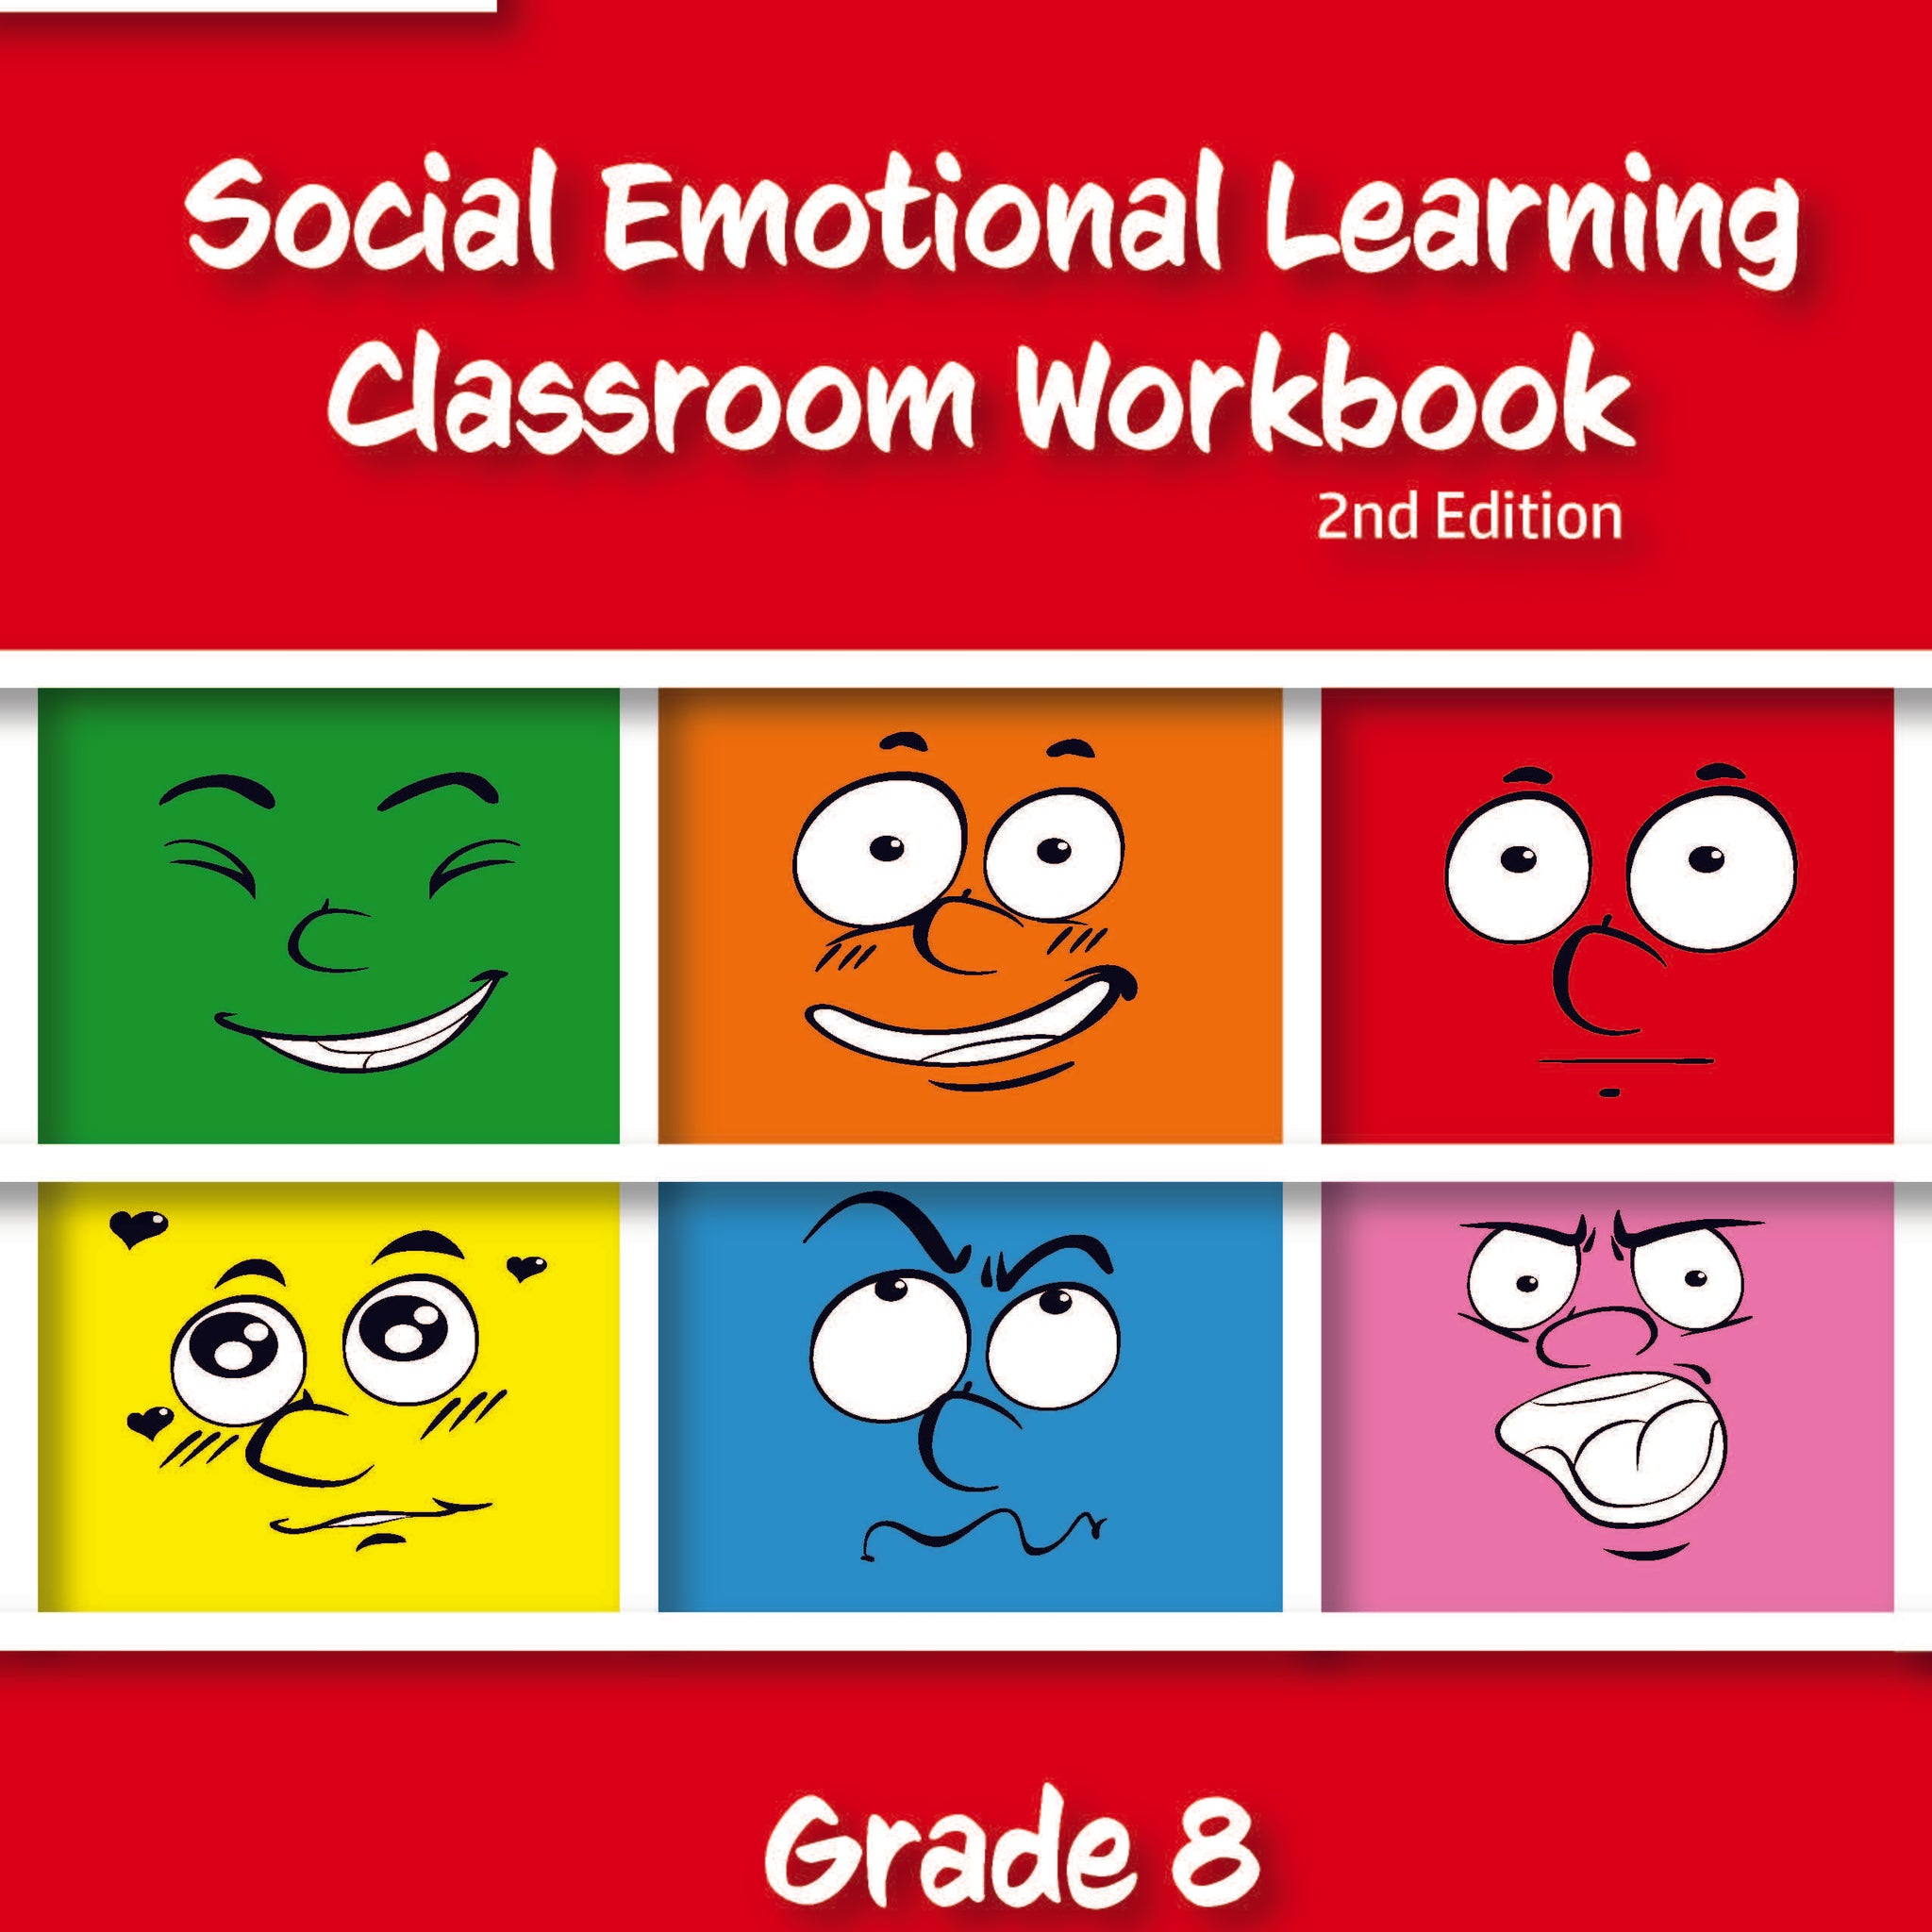 PREORDER Social Emotional Learning Classroom Workbook - Grade 8, 2nd edition (Due June 2024)